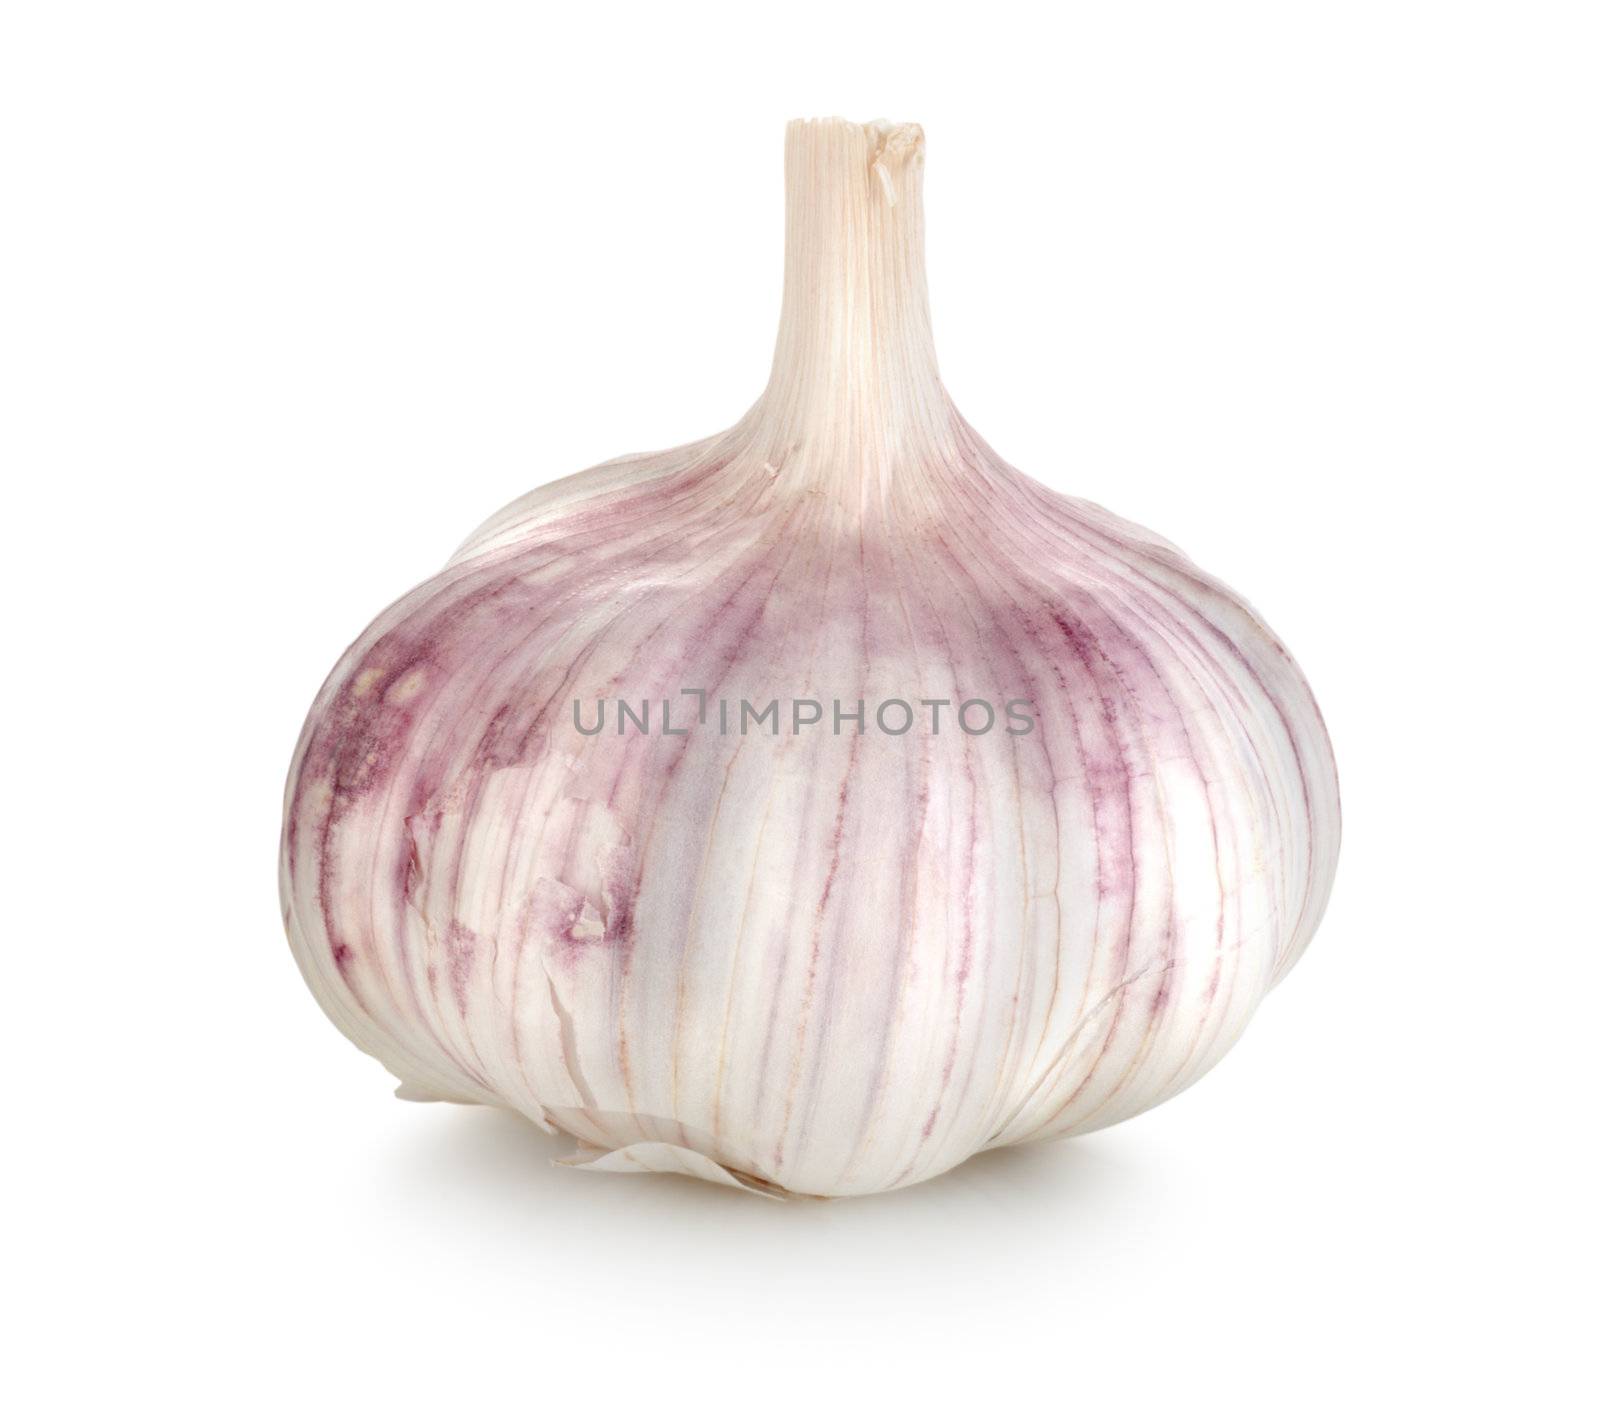 Raw garlic isolated on a white background